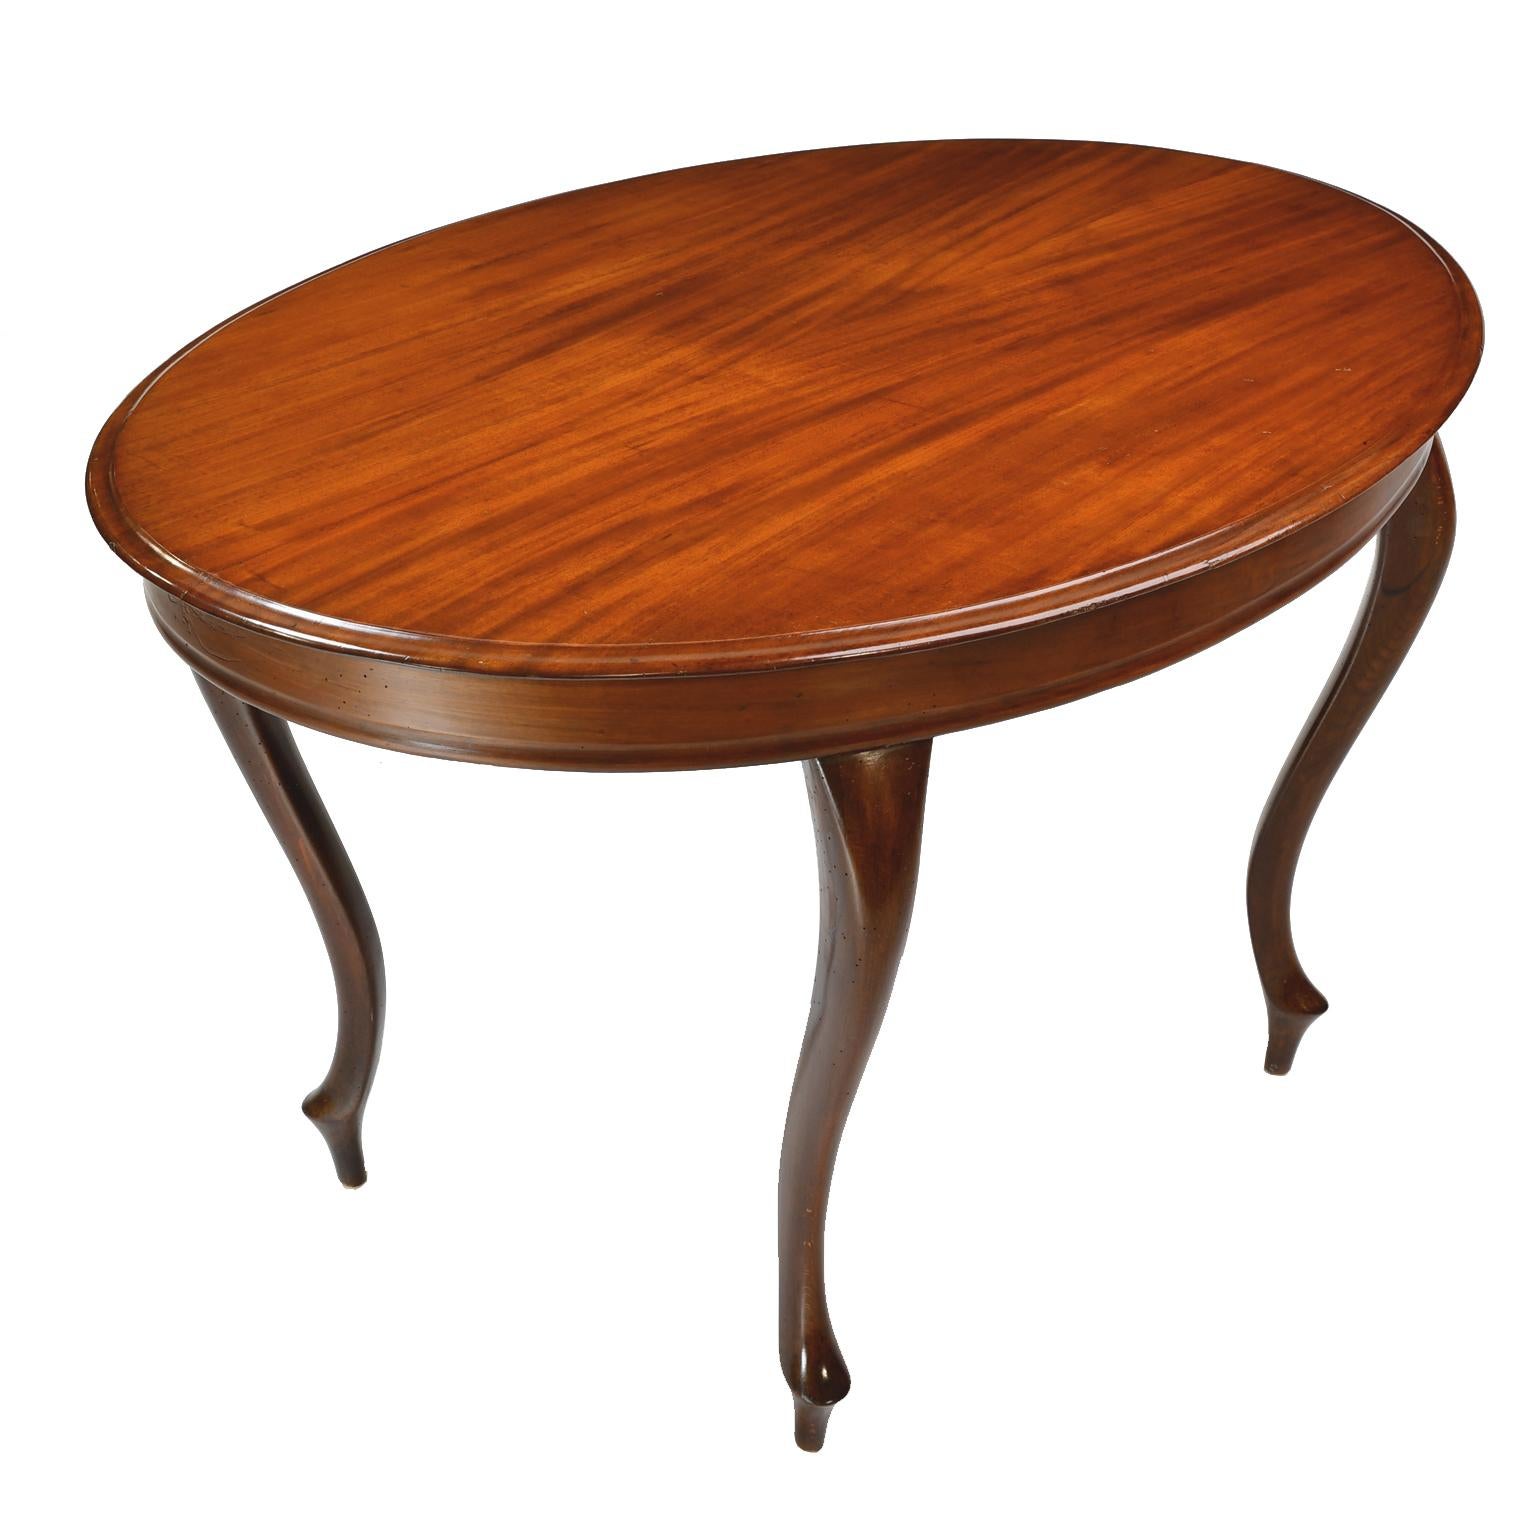 Antique Louis Philippe Style Mahogany Oval Dining/ Center Table, Denmark, c 1860 For Sale 3